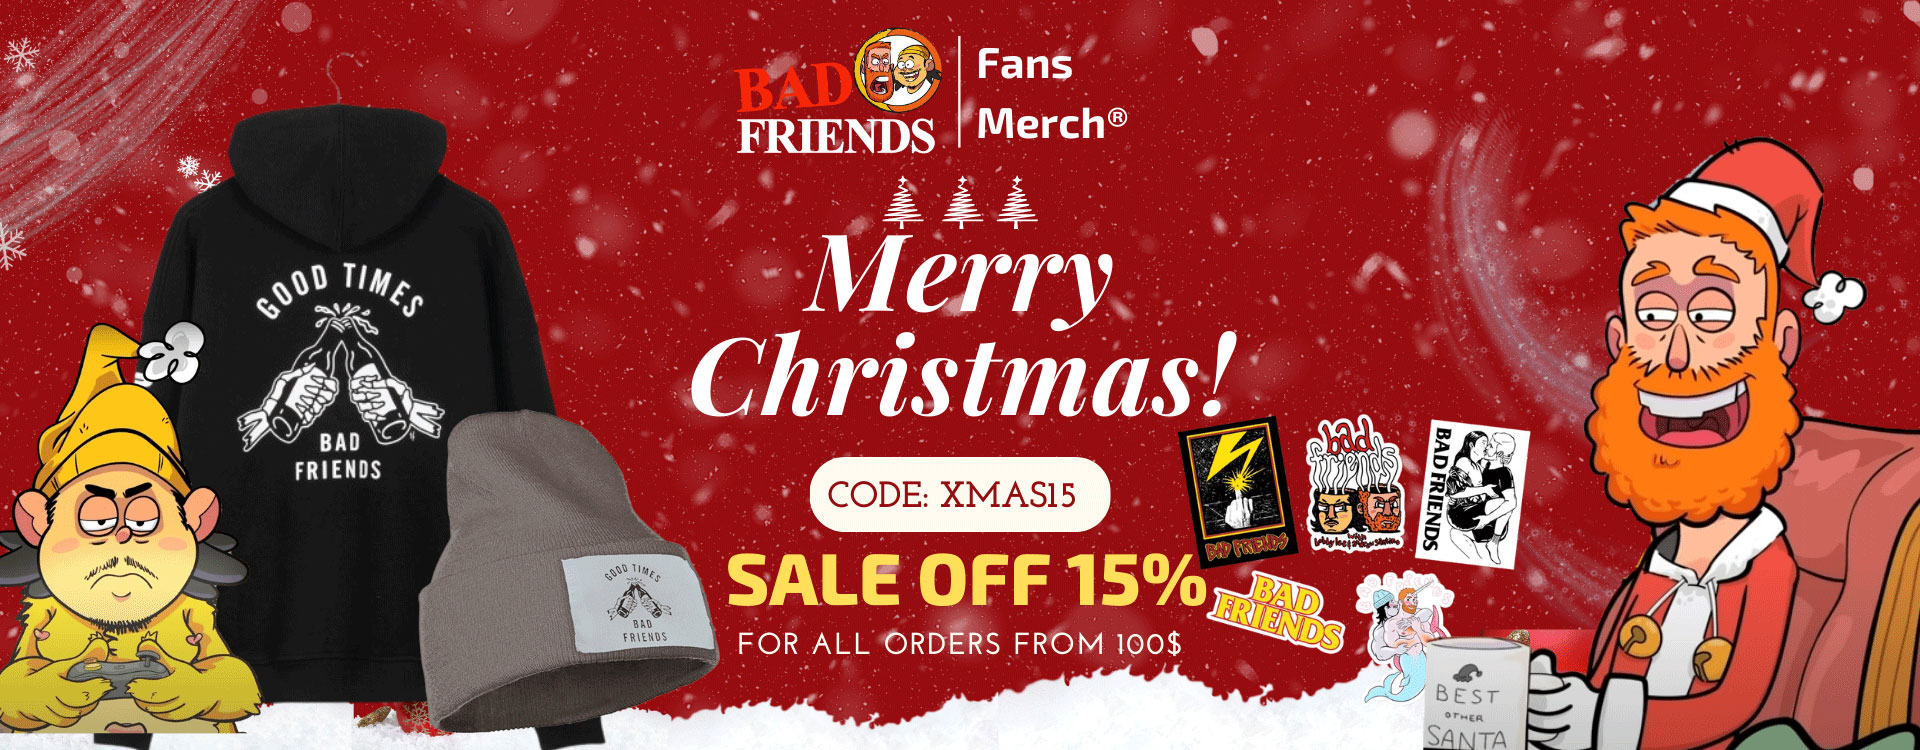 Bad Friends Store XMAS BANNER - Bad Friends Store